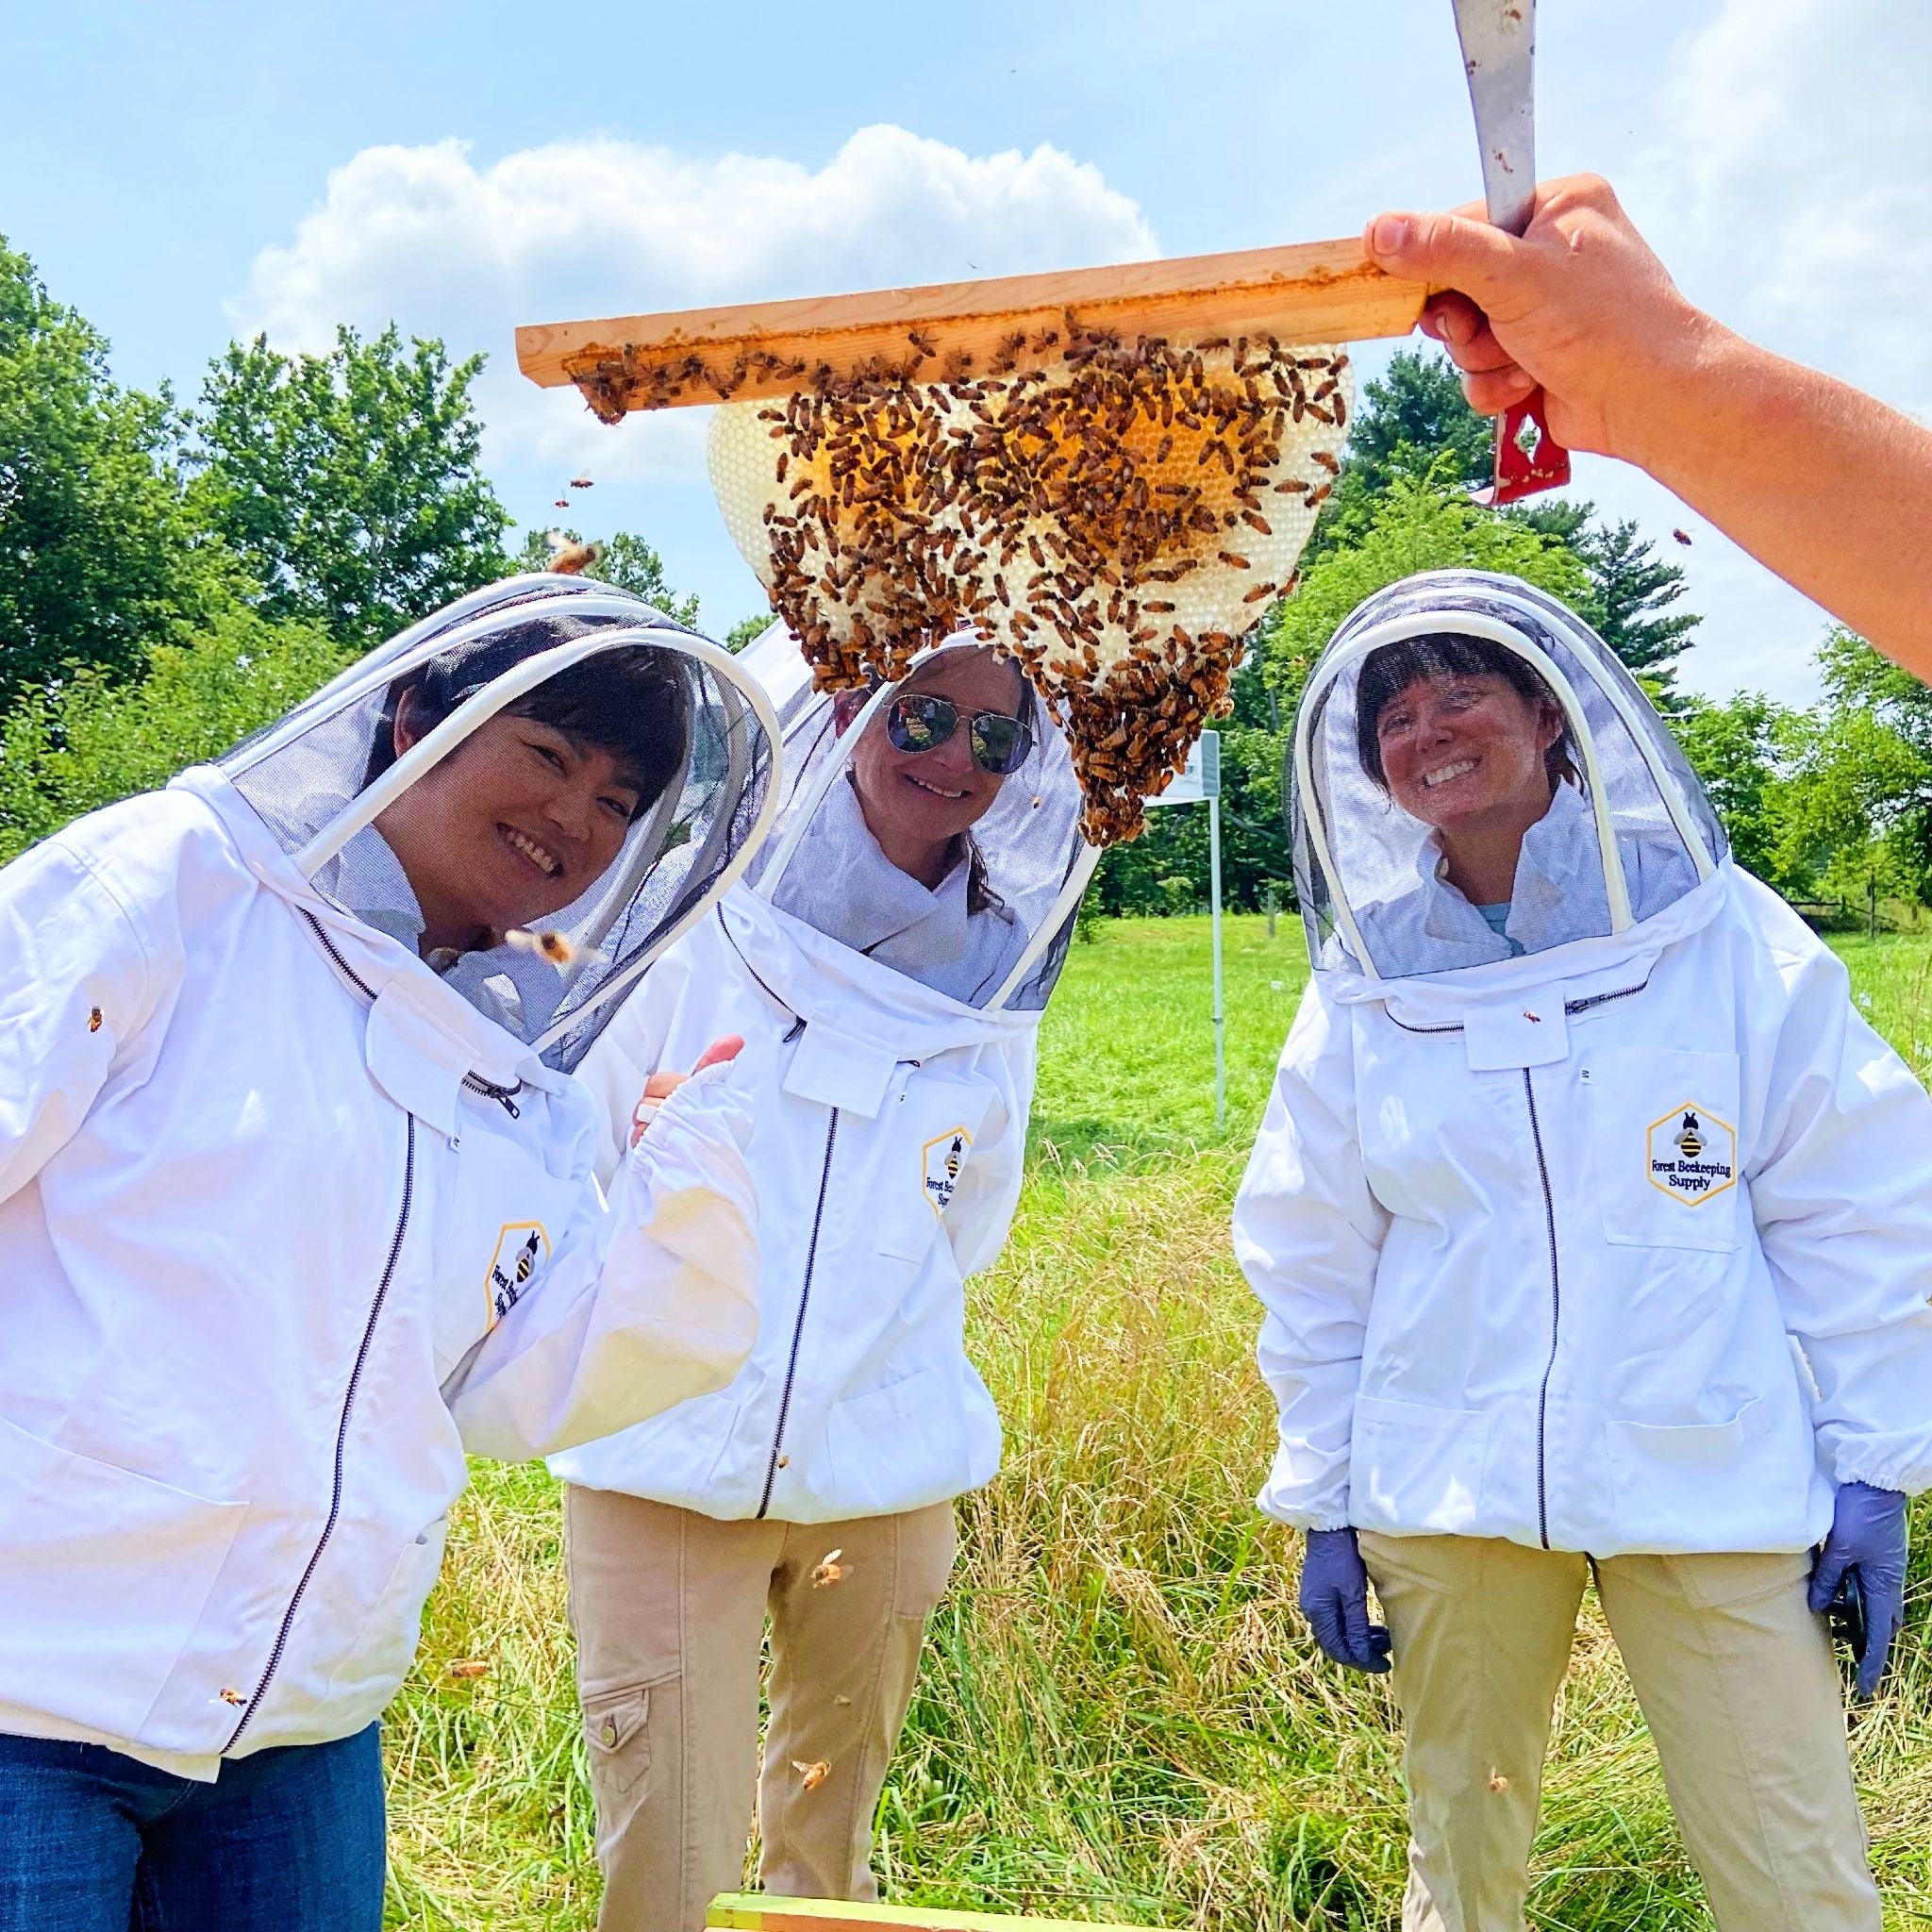 Mill Creek Apiary leads educational visits to live hives